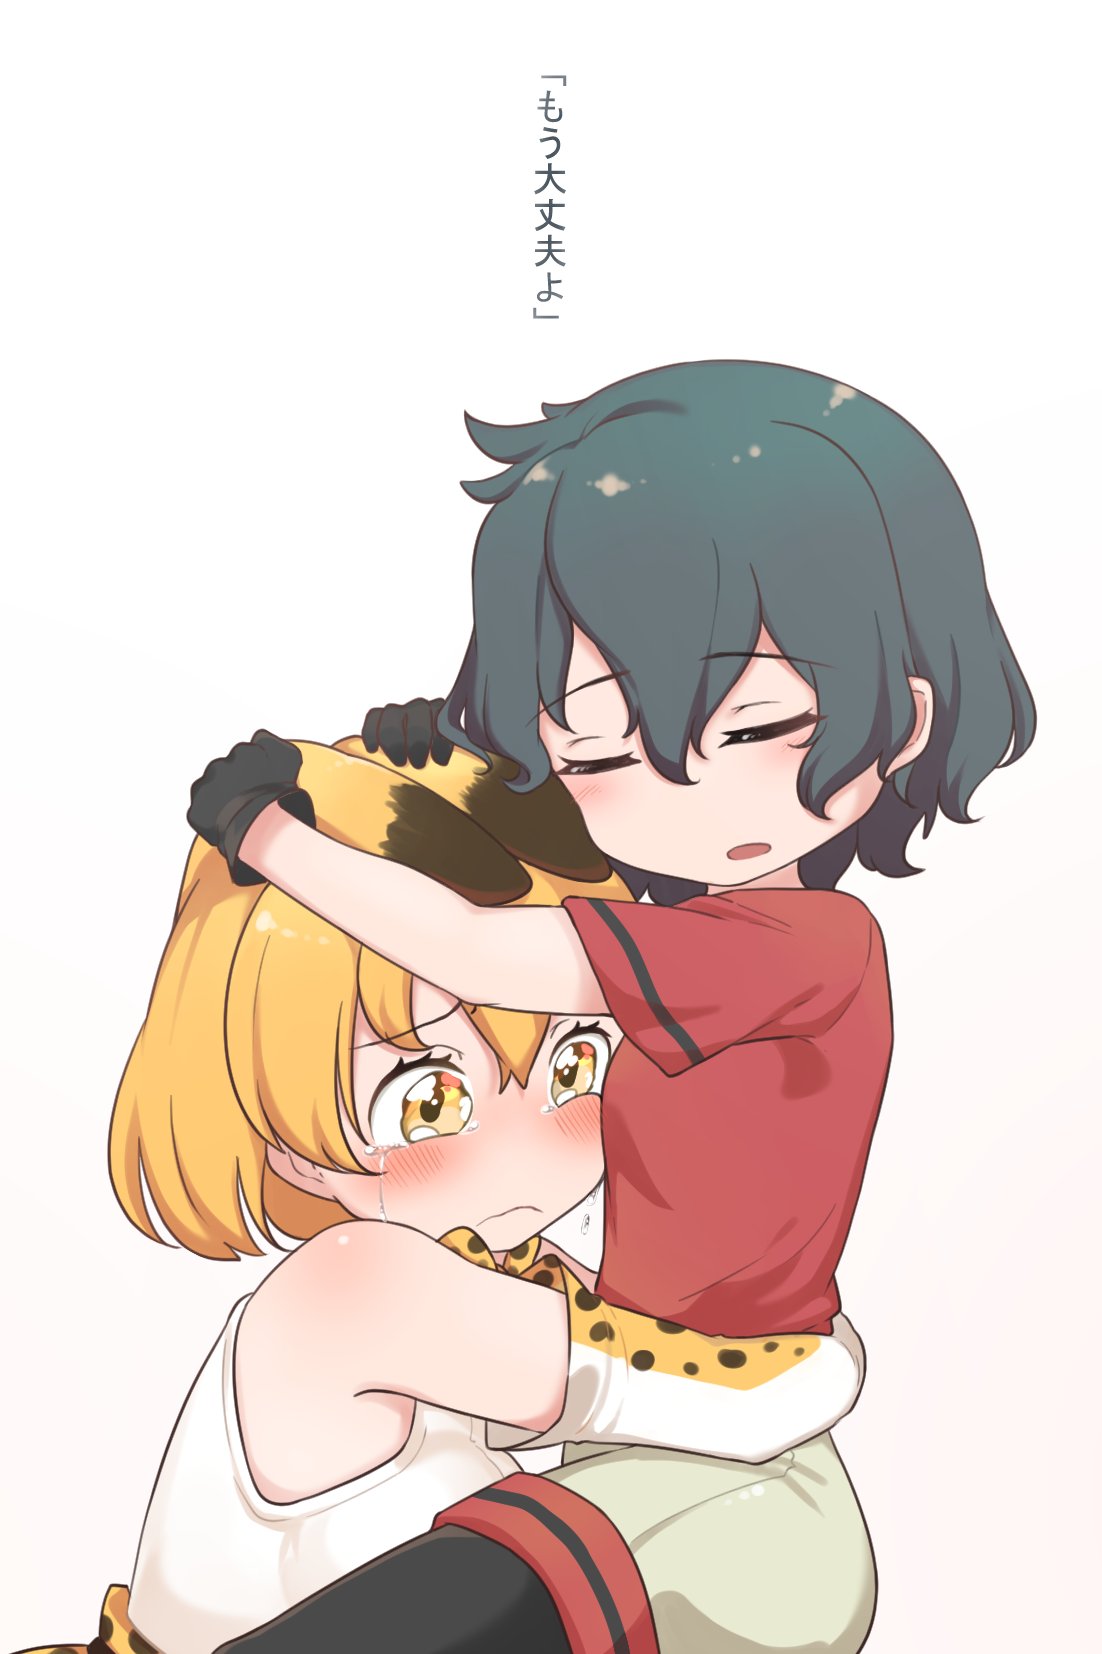 2girls animal_ears bare_shoulders beige_shorts black_hair black_legwear blonde_hair blush bow bowtie chis_(js60216) closed_eyes commentary_request crying elbow_gloves extra_ears gloves high-waist_skirt highres hug kaban_(kemono_friends) kemono_friends multicolored_hair multiple_girls no_headwear pantyhose print_gloves print_neckwear print_skirt red_shirt serval_(kemono_friends) serval_ears serval_girl serval_print shirt short_hair short_sleeves skirt sleeveless t-shirt translation_request white_shirt yellow_eyes